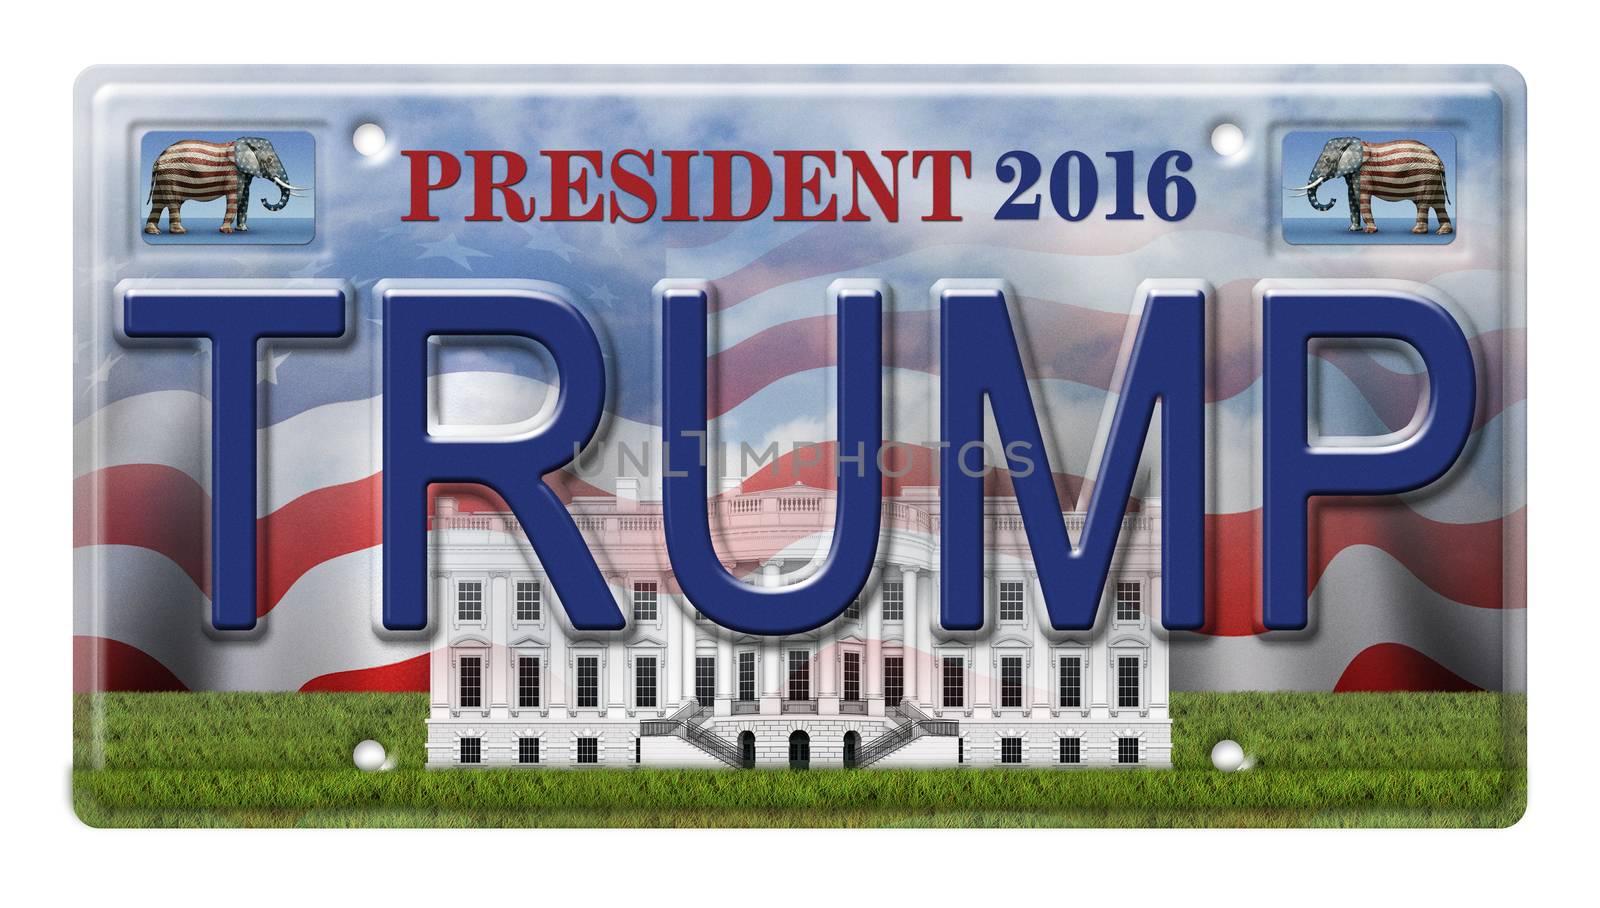 License Plate promoting Donald Trump as a candidate for the presidential election in 2016. Includes a clipping path.